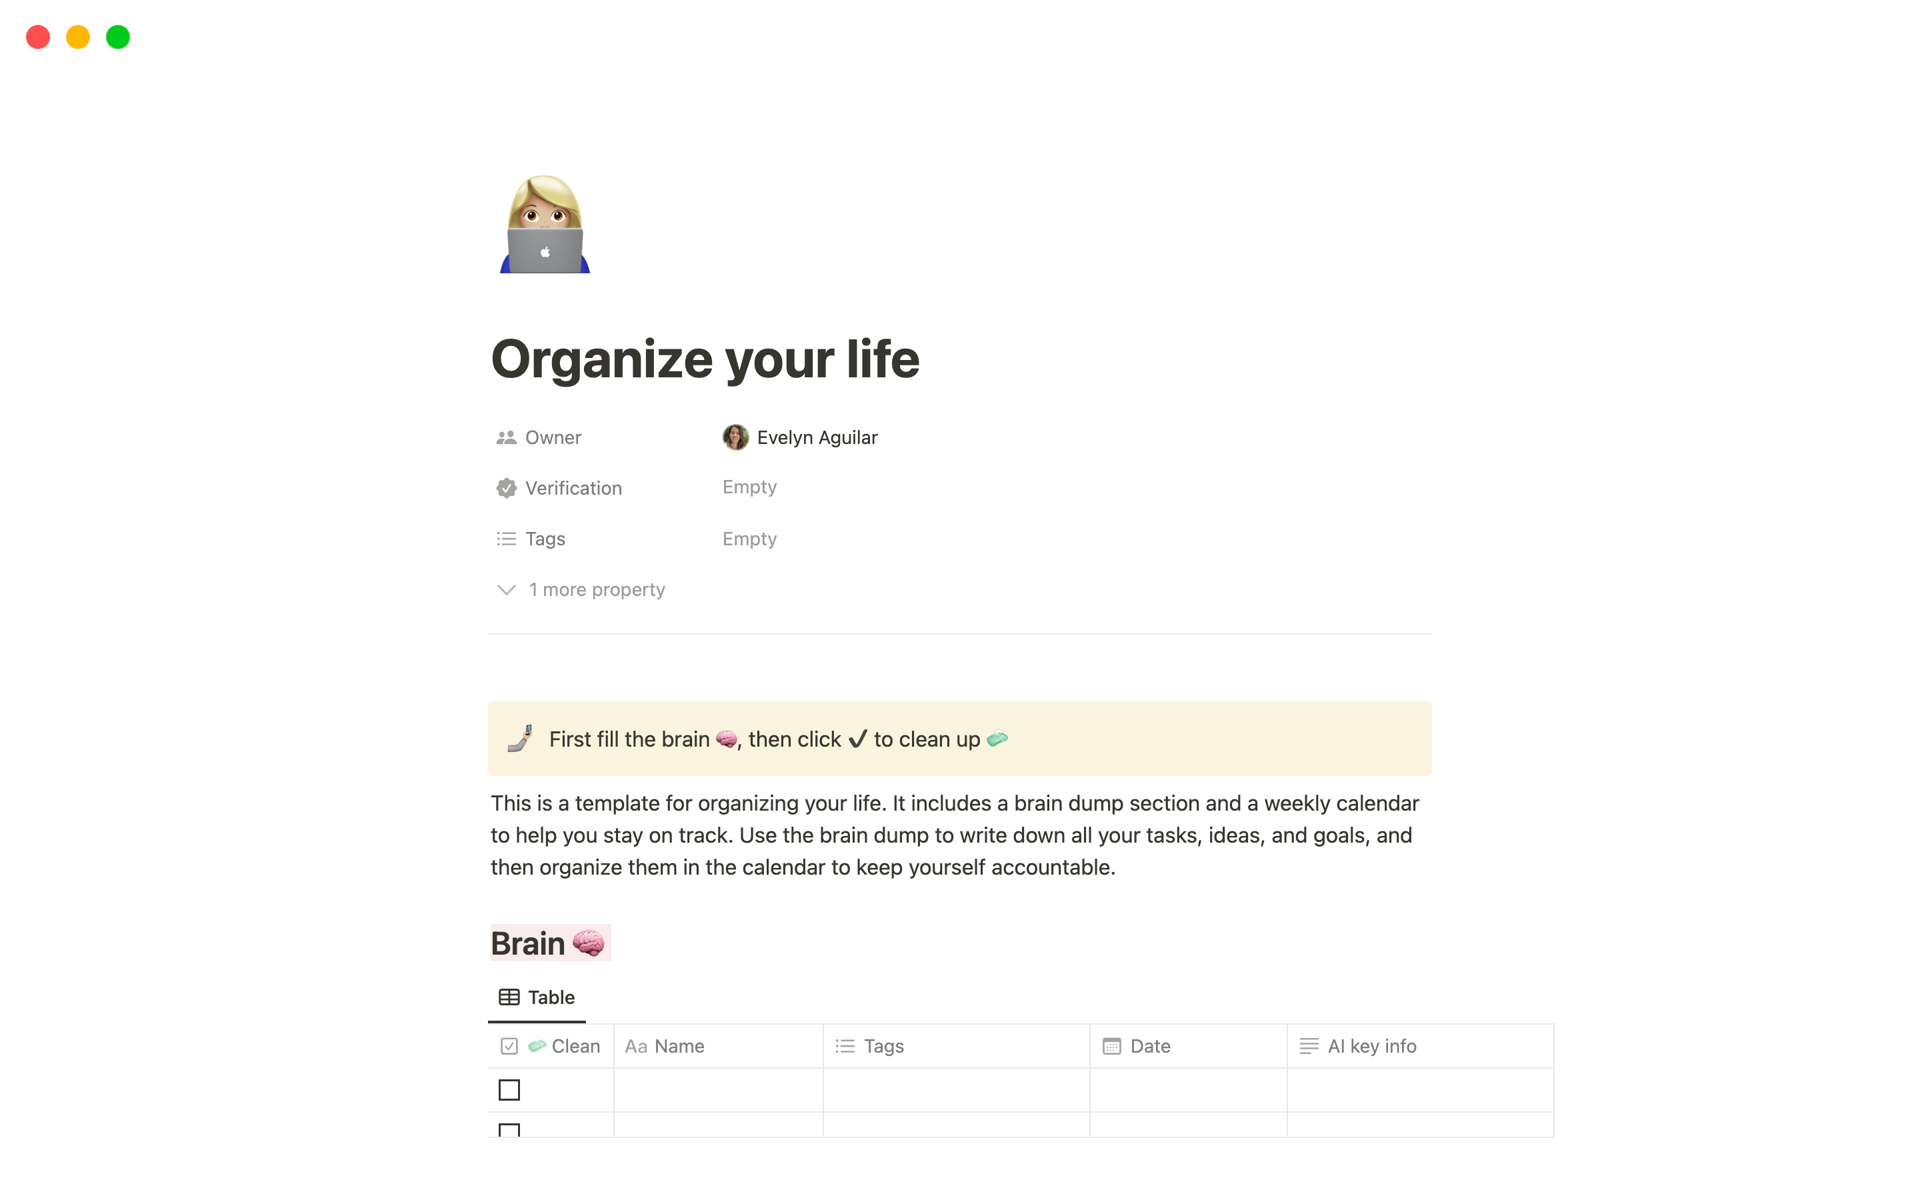 This template helps you organize your life with a brain dump section and weekly calendar. Write down all your tasks, ideas, and goals in the brain dump, then organize them in the calendar to stay accountable.